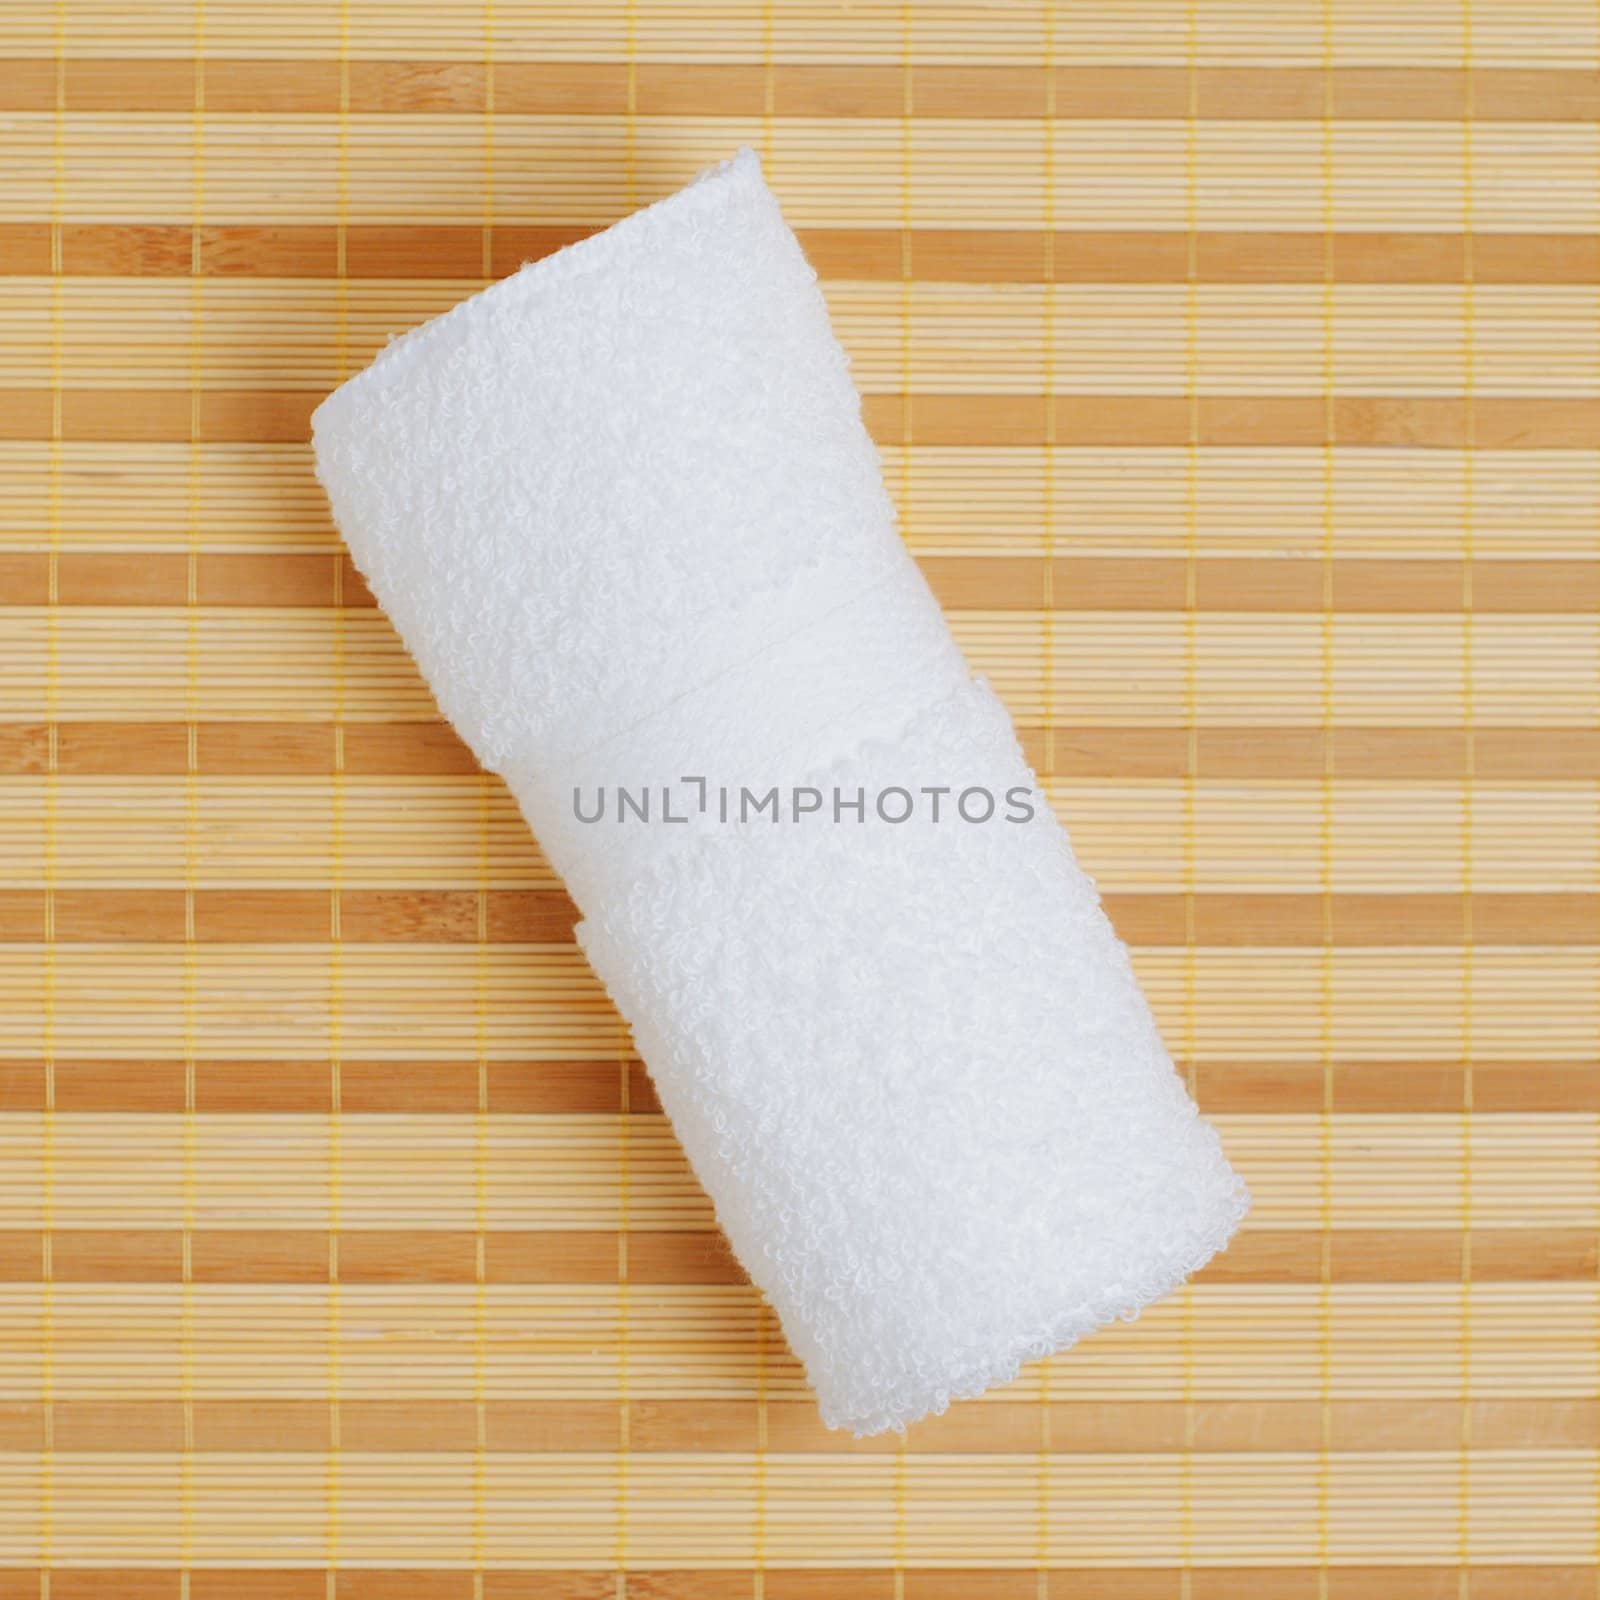 White towel against bamboo reed mat background.